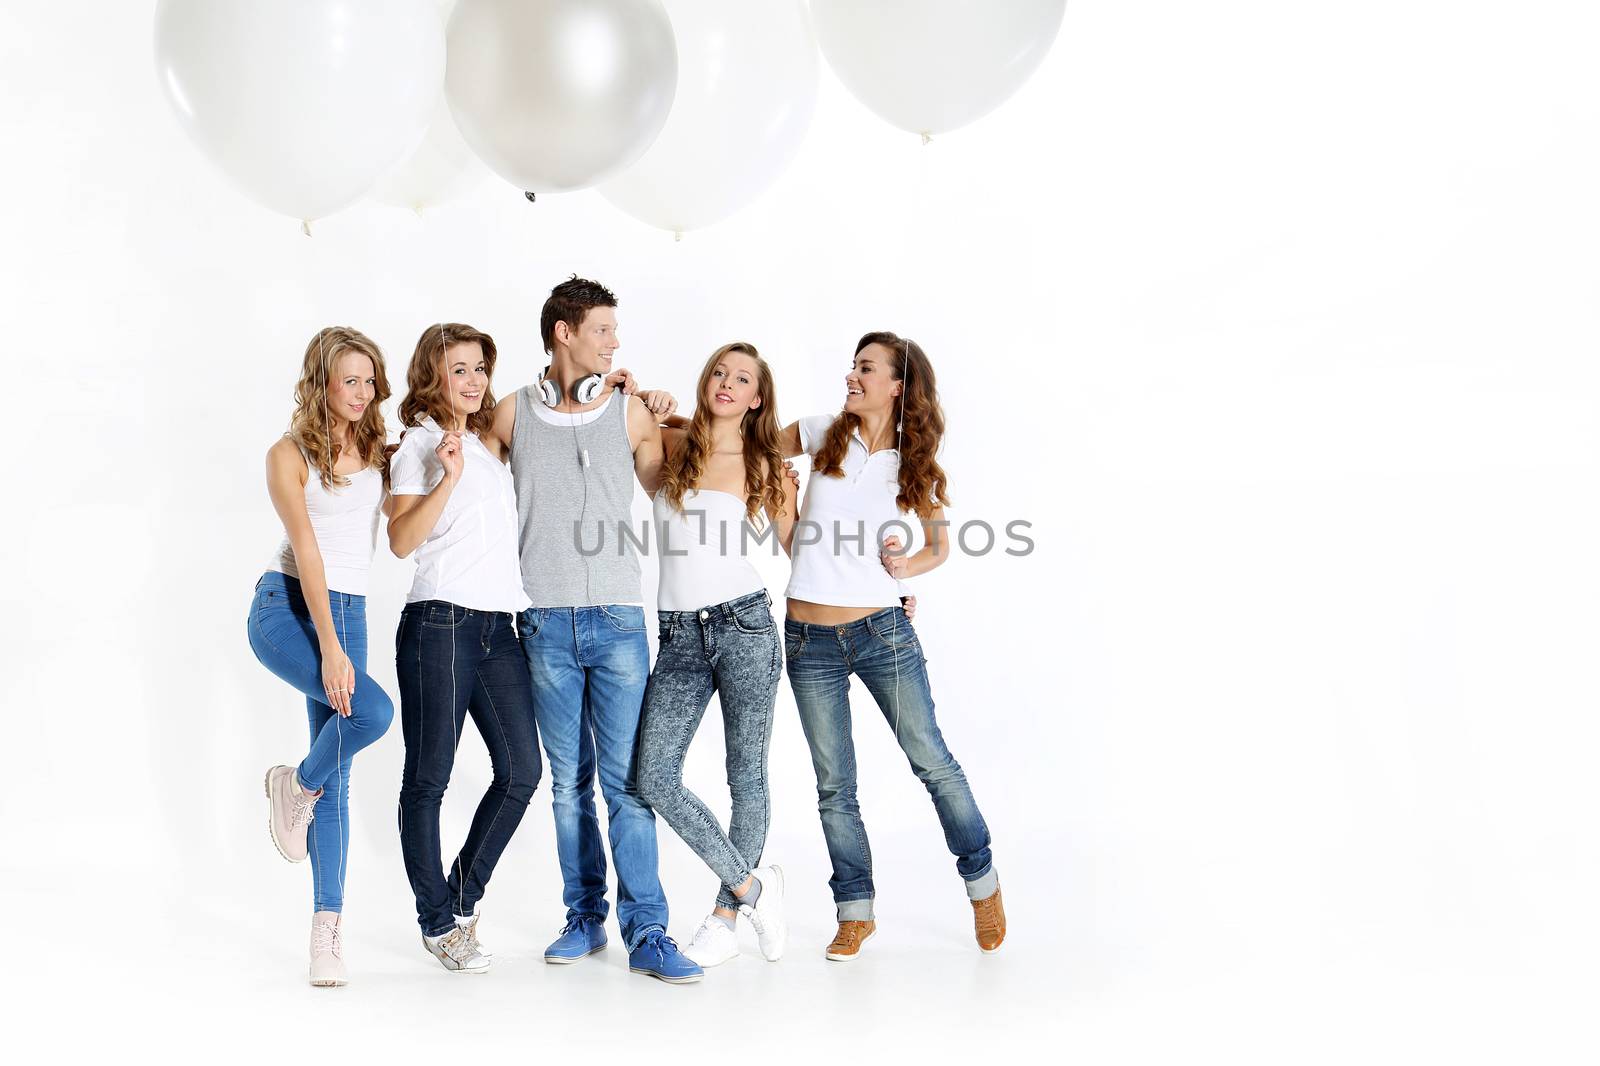 The team of five young people dressed in white shirt and jeans posing with giant balloons